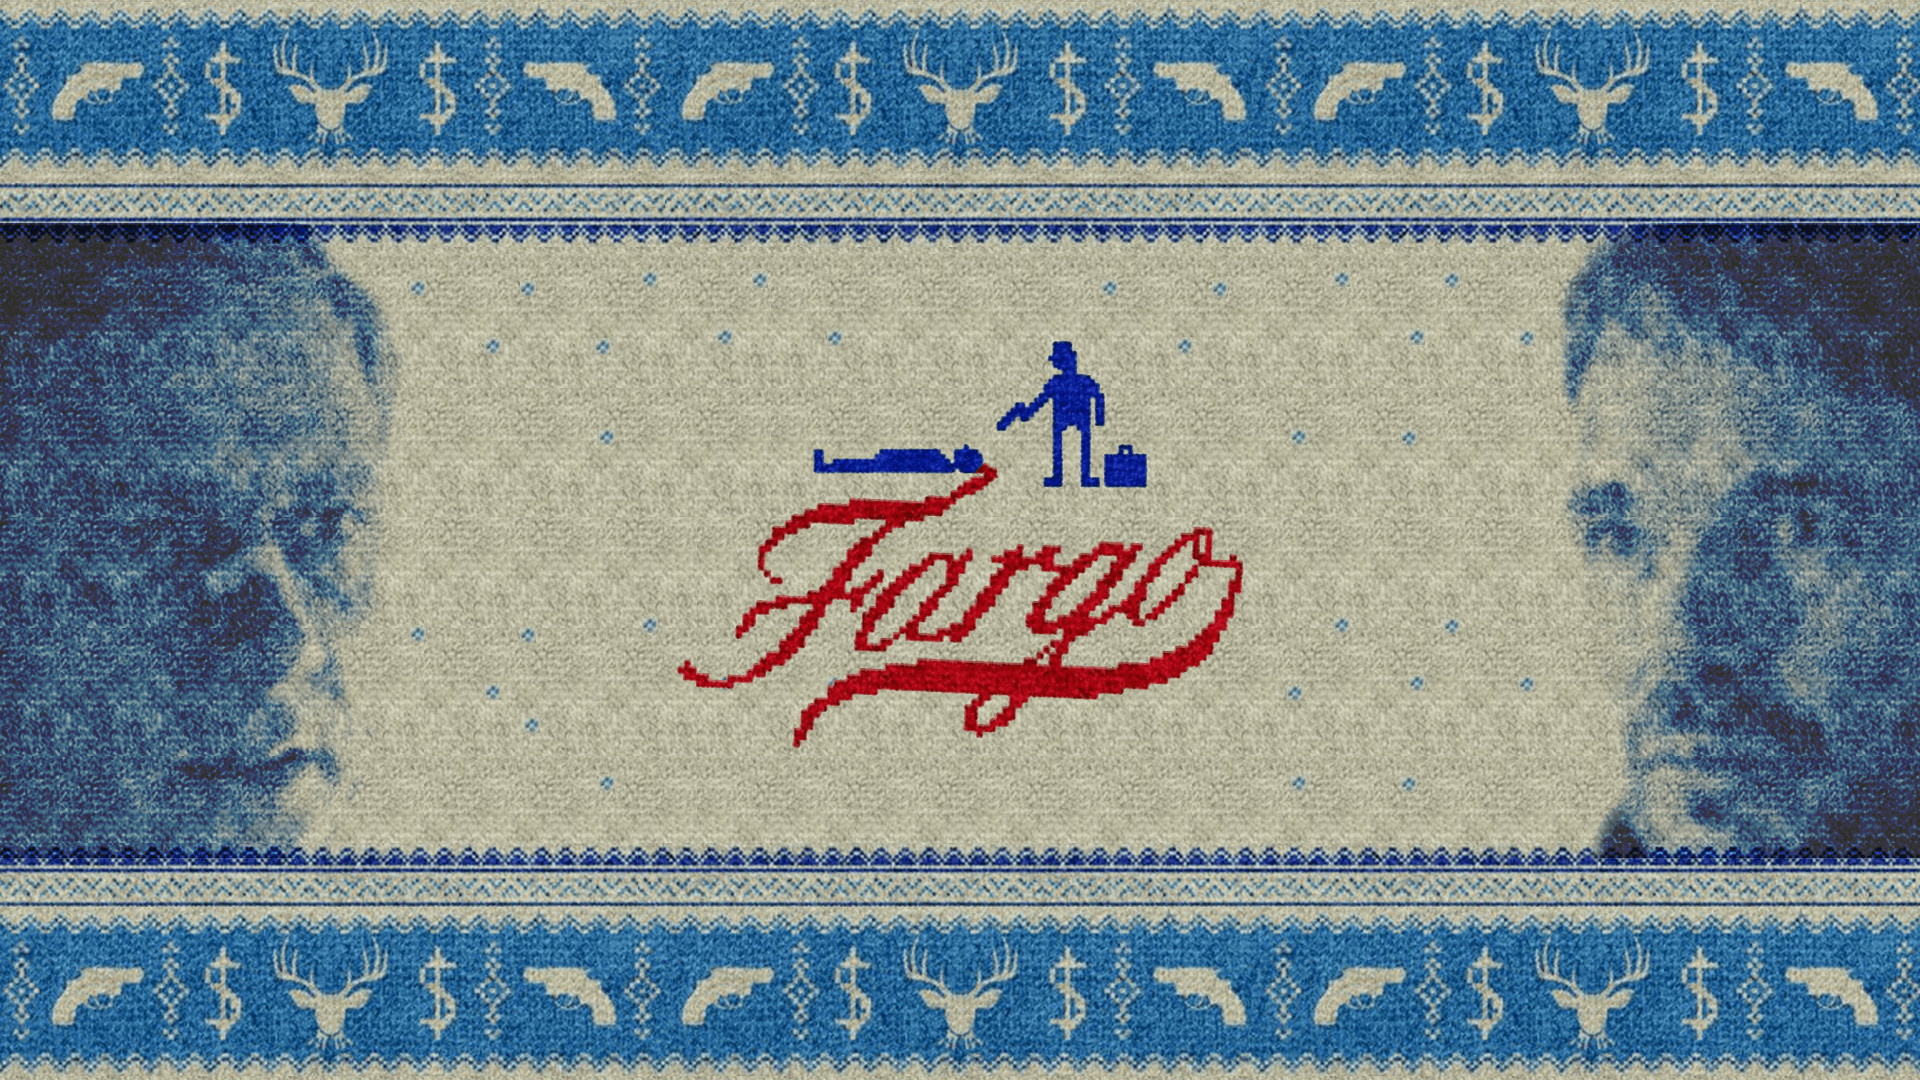 1920x1080 Fargo Wallpapers, Awesome 37 Fargo Wallpapers | HDQ Cover Pics FN.NG